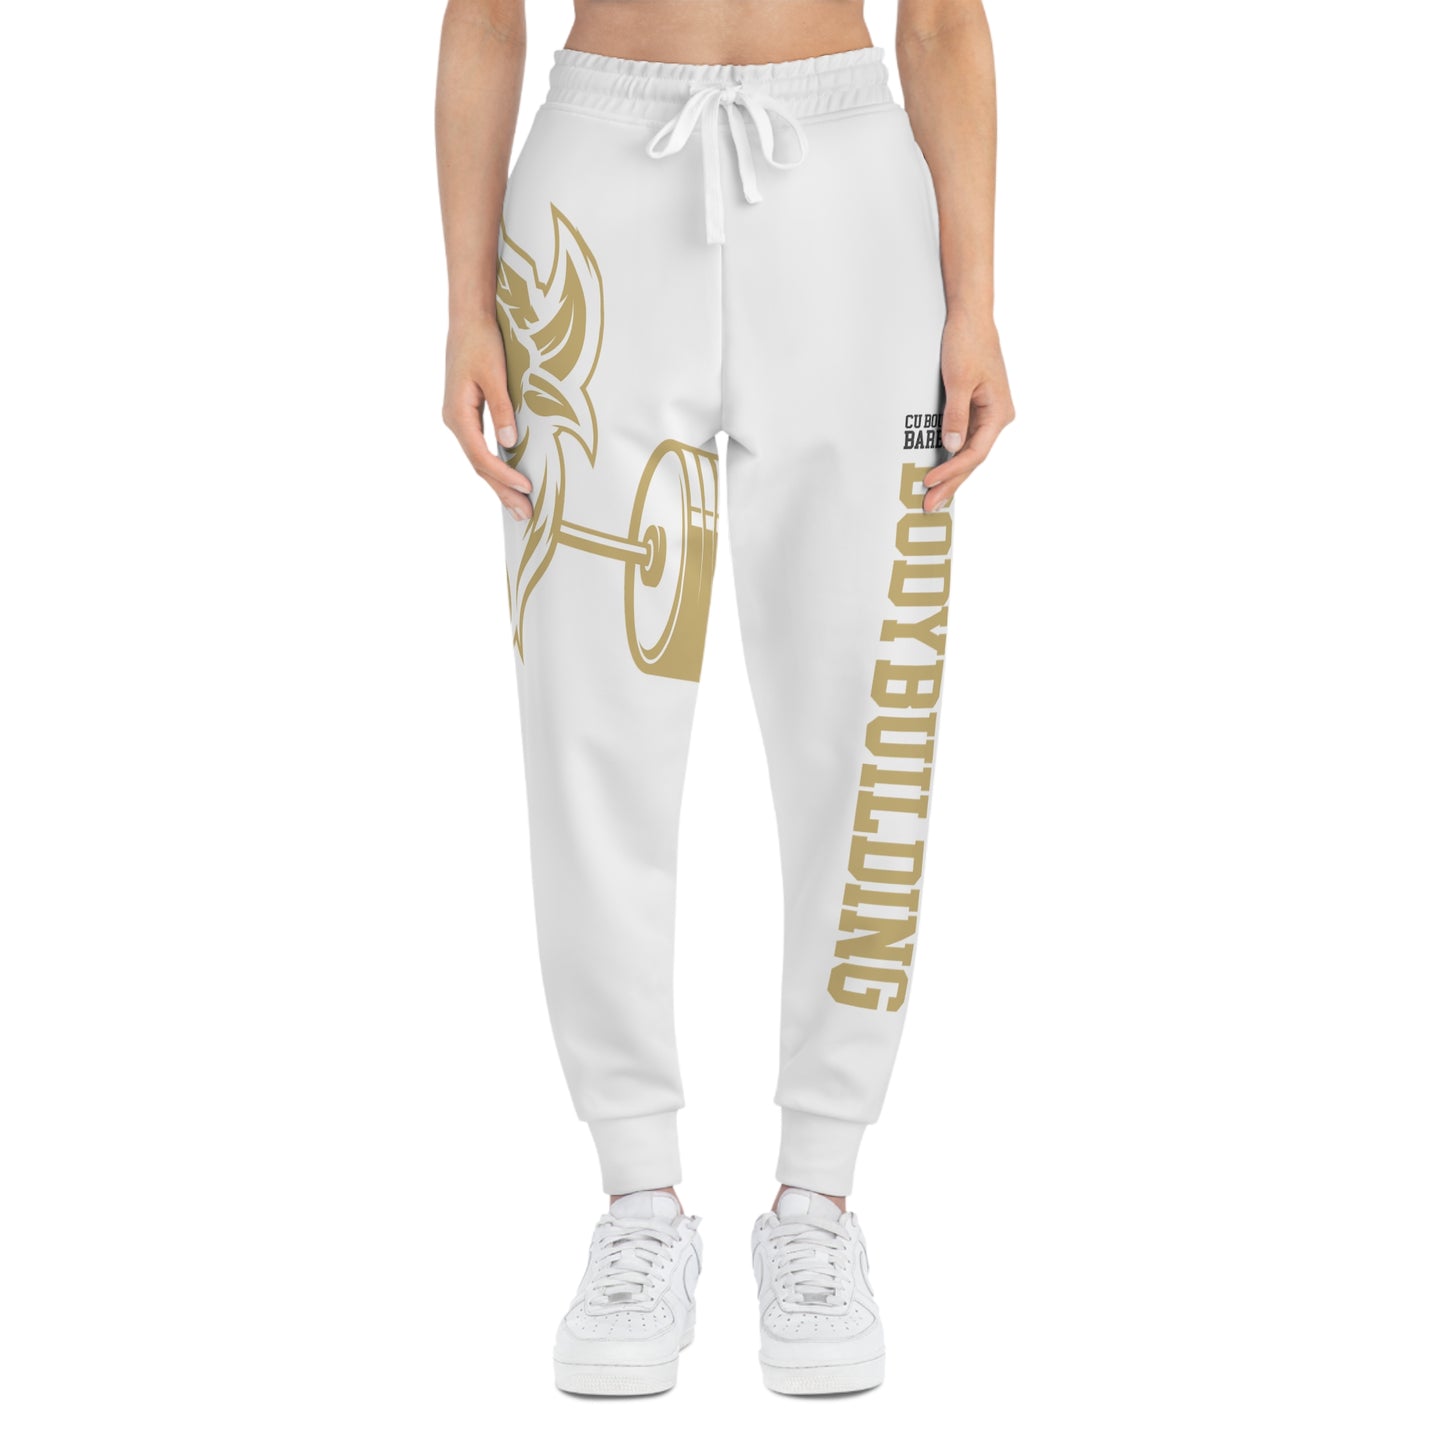 CU Barbell Bodybuilding Warm-Up Joggers (White)